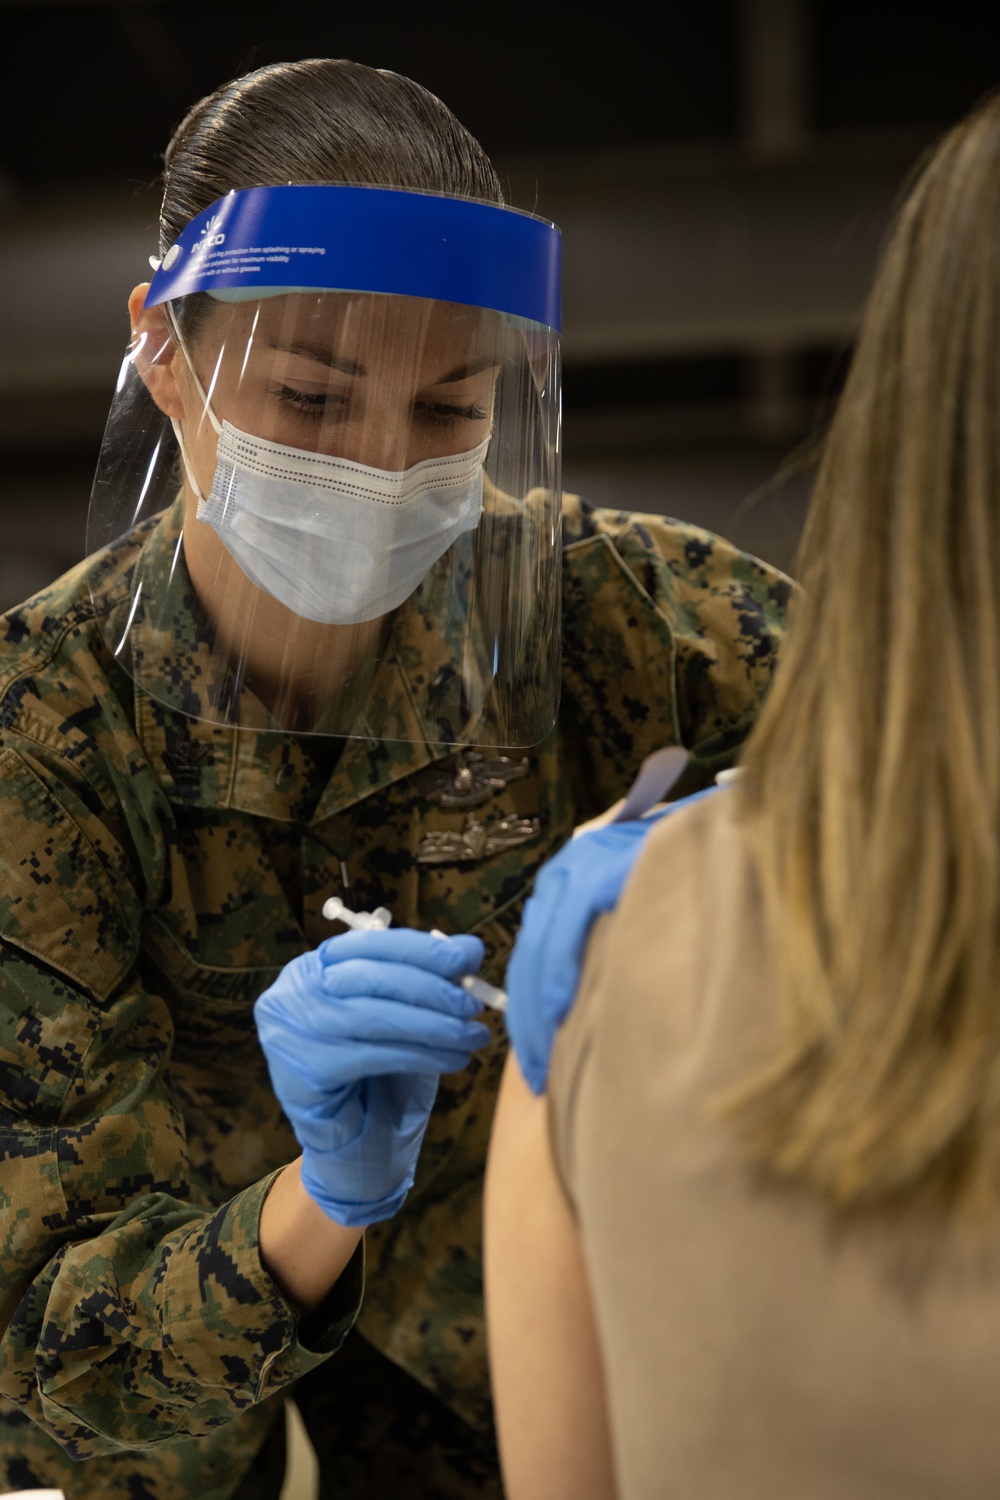 CLB-22 continues vaccination effort during first week of operations in Philadelphia